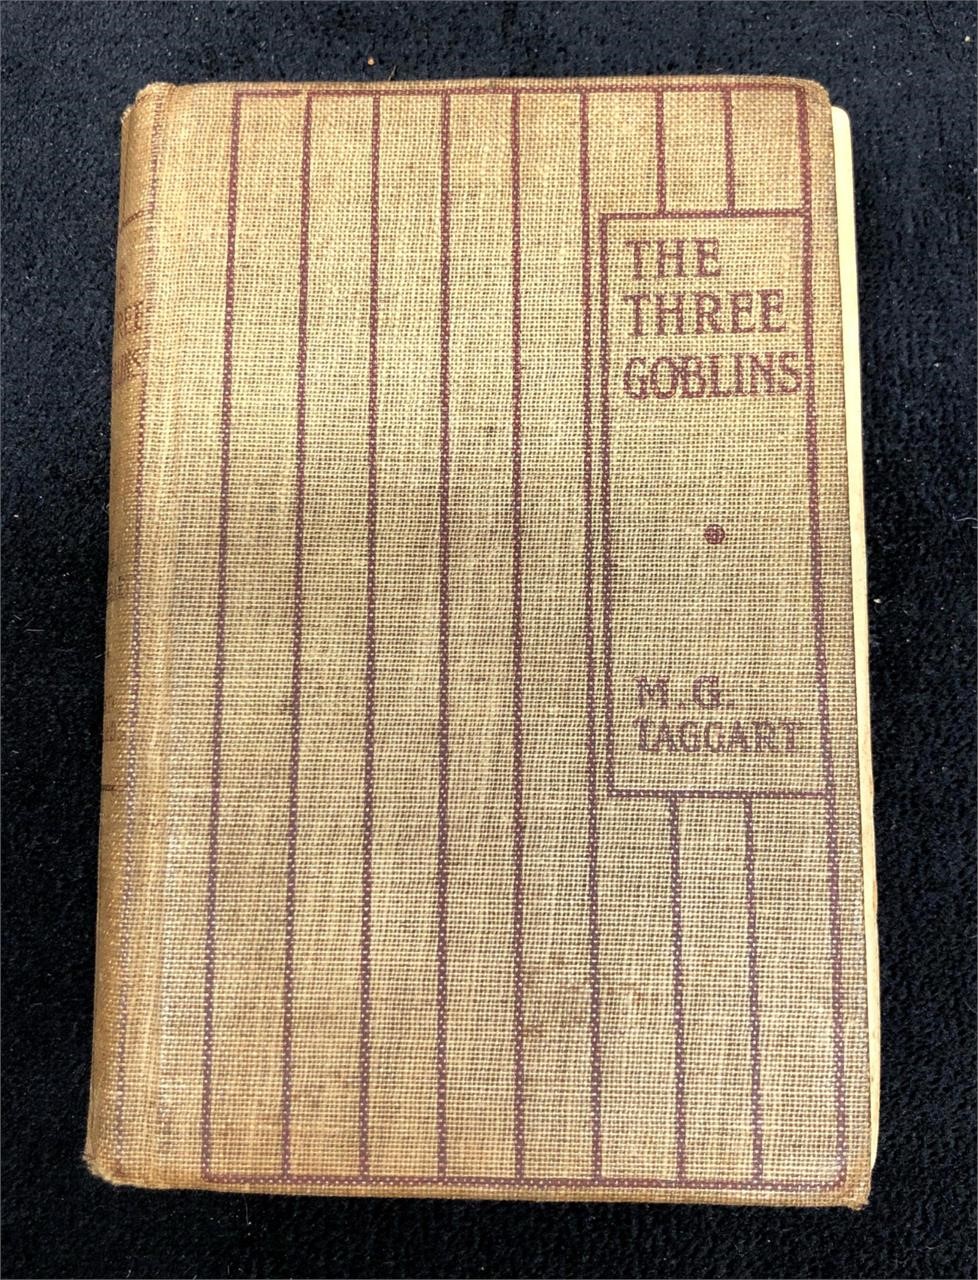 "The Three Goblins" by M. G. Taggart - Hardcover